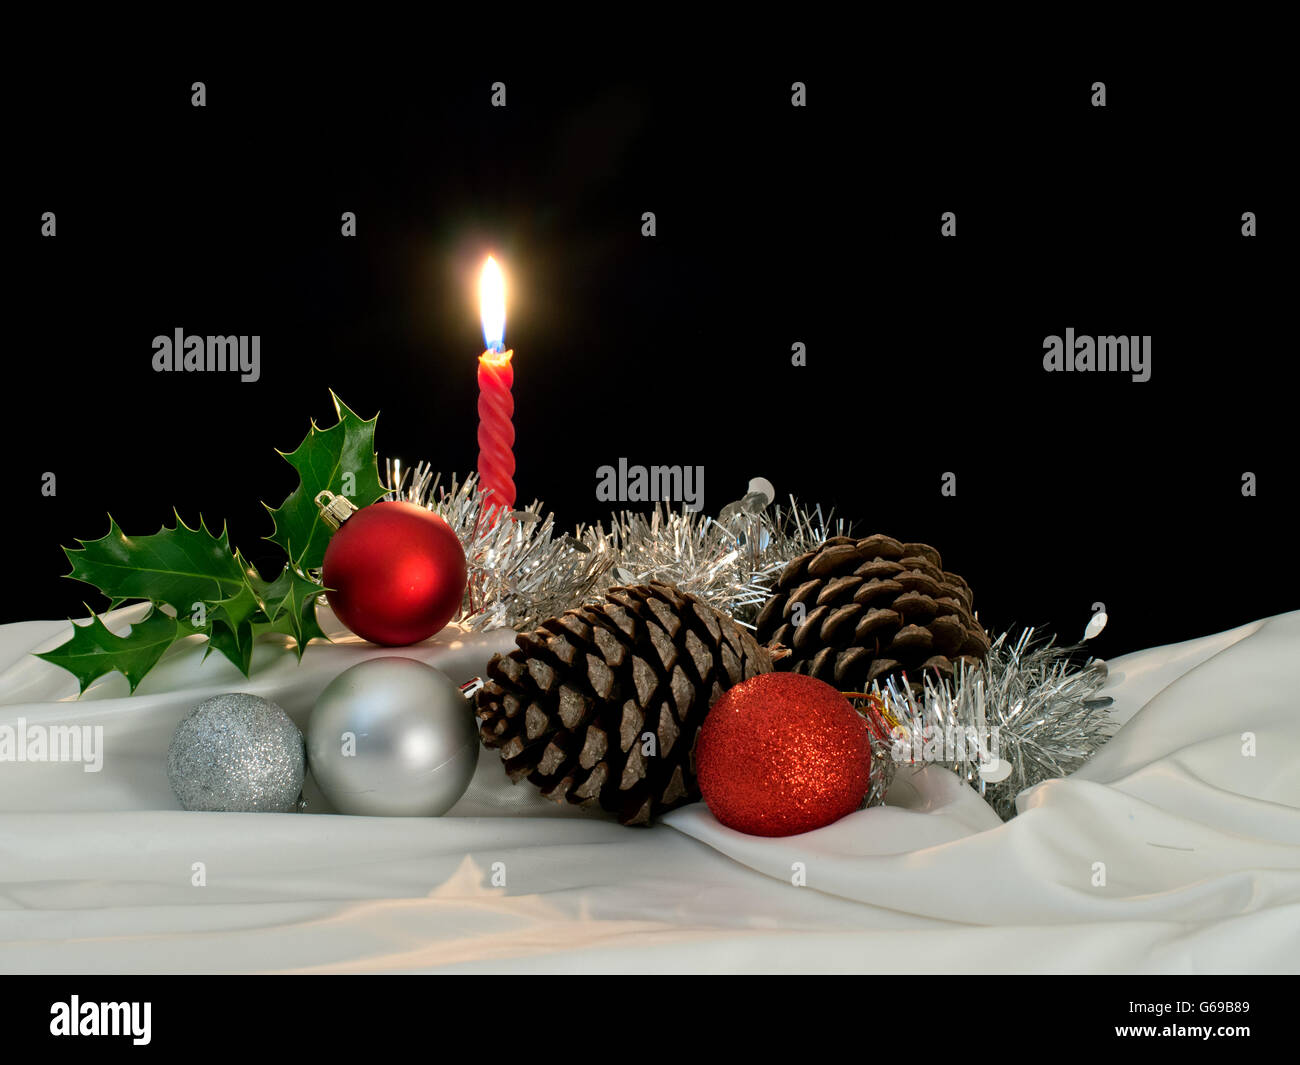 Traditional seasonal objects. Primarily lilt by candle light. Black background, copyspace. Stock Photo